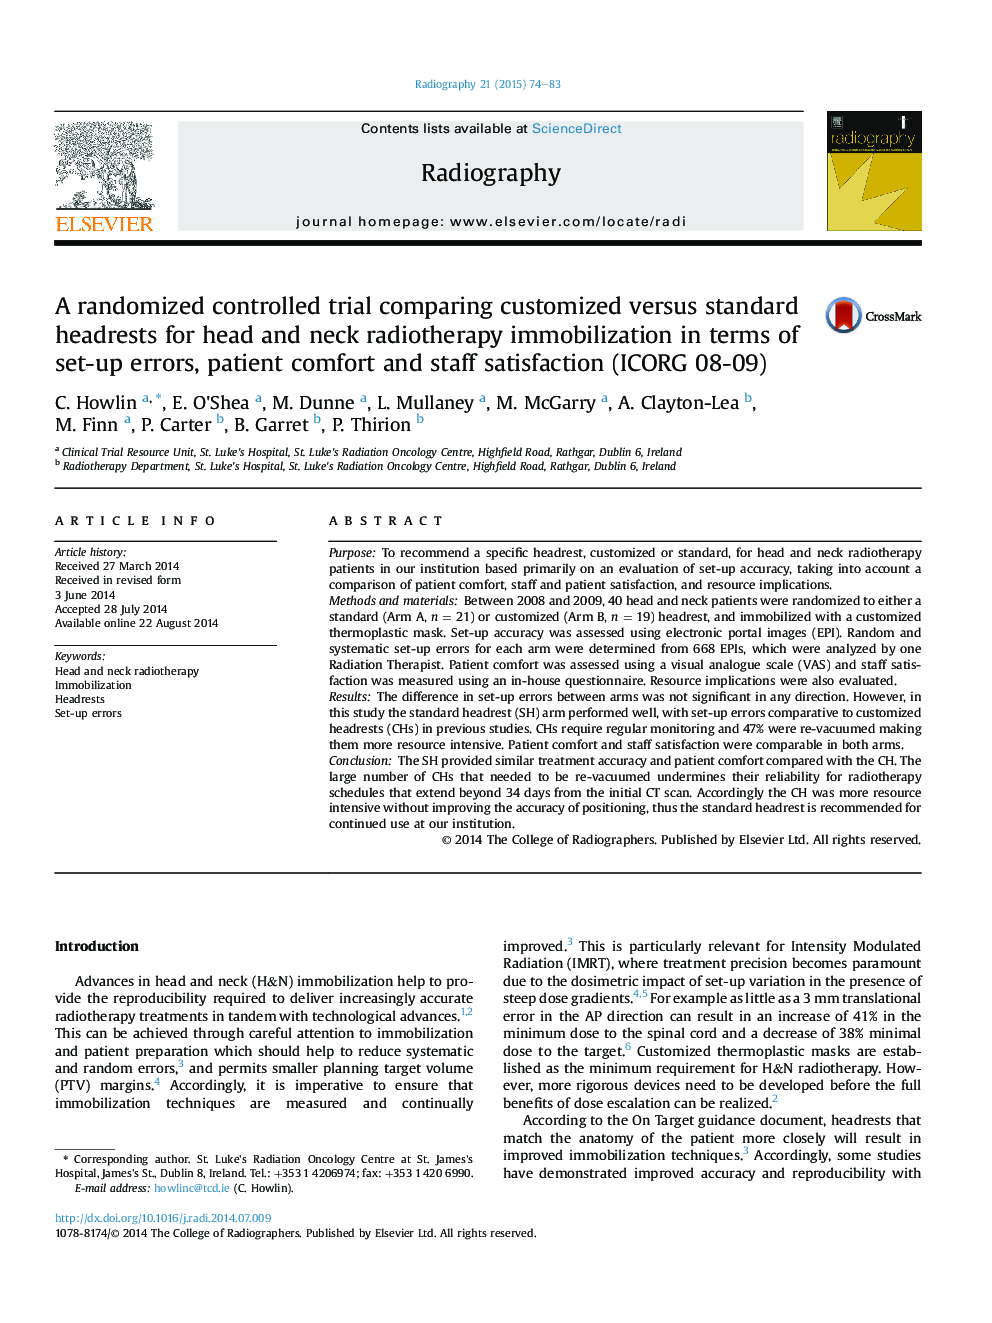 A randomized controlled trial comparing customized versus standard headrests for head and neck radiotherapy immobilization in terms of set-up errors, patient comfort and staff satisfaction (ICORG 08-09)